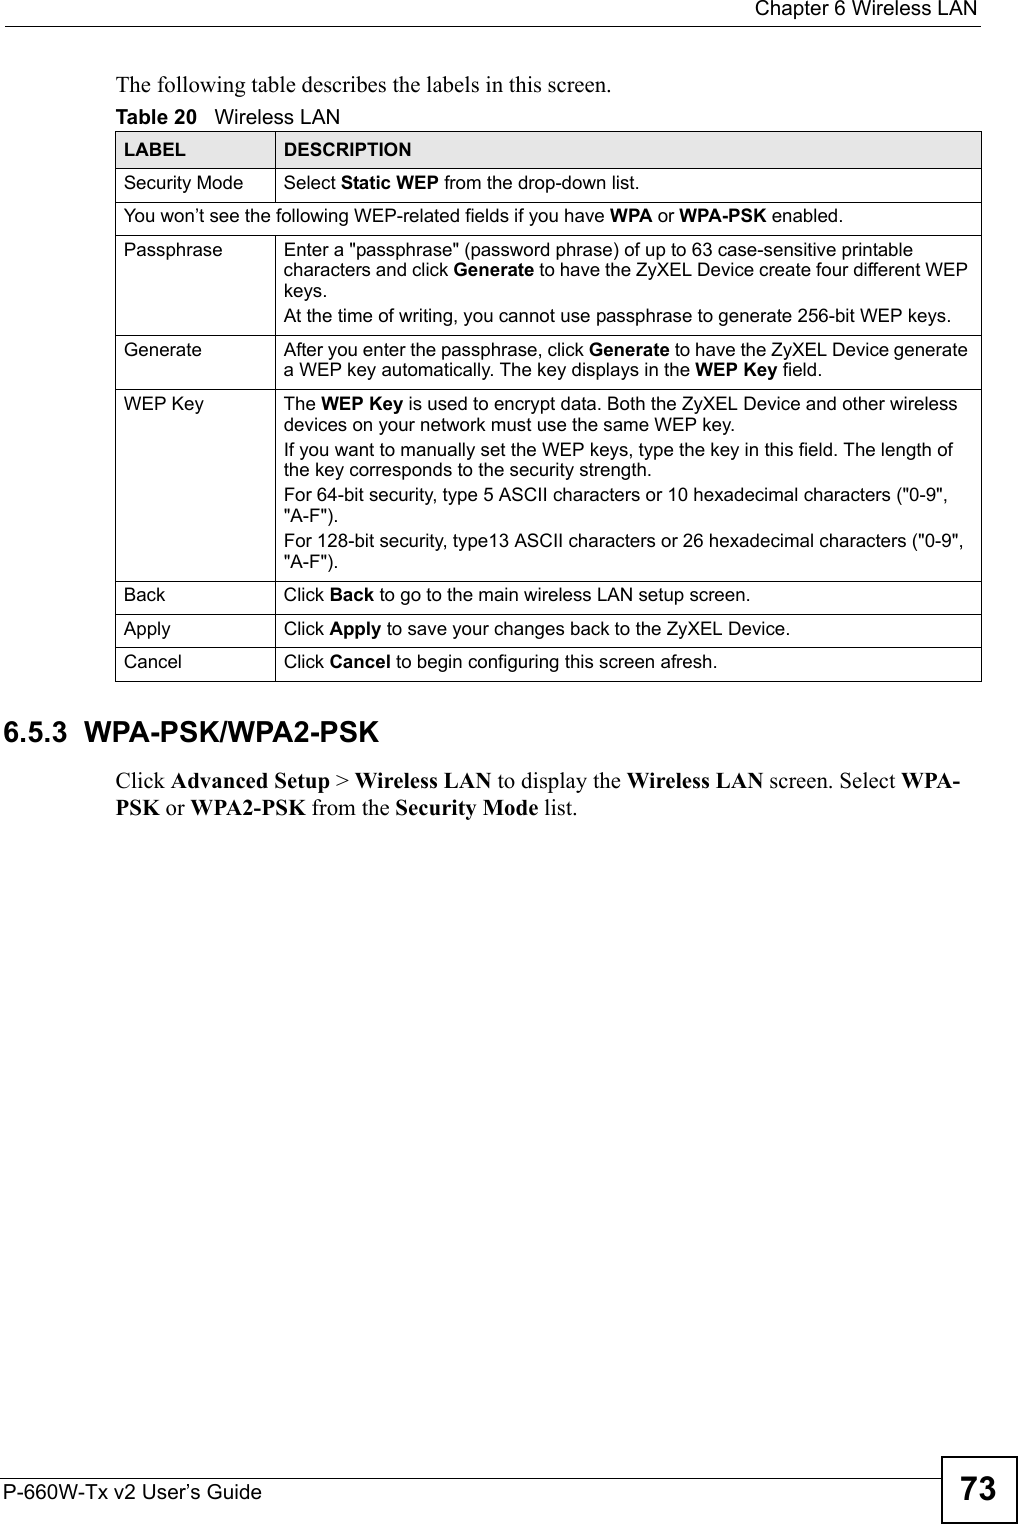  Chapter 6 Wireless LANP-660W-Tx v2 User’s Guide 73The following table describes the labels in this screen.6.5.3  WPA-PSK/WPA2-PSKClick Advanced Setup &gt; Wireless LAN to display the Wireless LAN screen. Select WPA-PSK or WPA2-PSK from the Security Mode list.Table 20   Wireless LANLABEL DESCRIPTIONSecurity Mode Select Static WEP from the drop-down list.You won’t see the following WEP-related fields if you have WPA or WPA-PSK enabled.Passphrase Enter a &quot;passphrase&quot; (password phrase) of up to 63 case-sensitive printable characters and click Generate to have the ZyXEL Device create four different WEP keys. At the time of writing, you cannot use passphrase to generate 256-bit WEP keys. Generate After you enter the passphrase, click Generate to have the ZyXEL Device generate a WEP key automatically. The key displays in the WEP Key field. WEP Key The WEP Key is used to encrypt data. Both the ZyXEL Device and other wireless devices on your network must use the same WEP key.If you want to manually set the WEP keys, type the key in this field. The length of the key corresponds to the security strength.For 64-bit security, type 5 ASCII characters or 10 hexadecimal characters (&quot;0-9&quot;, &quot;A-F&quot;). For 128-bit security, type13 ASCII characters or 26 hexadecimal characters (&quot;0-9&quot;, &quot;A-F&quot;). Back Click Back to go to the main wireless LAN setup screen. Apply Click Apply to save your changes back to the ZyXEL Device. Cancel Click Cancel to begin configuring this screen afresh.